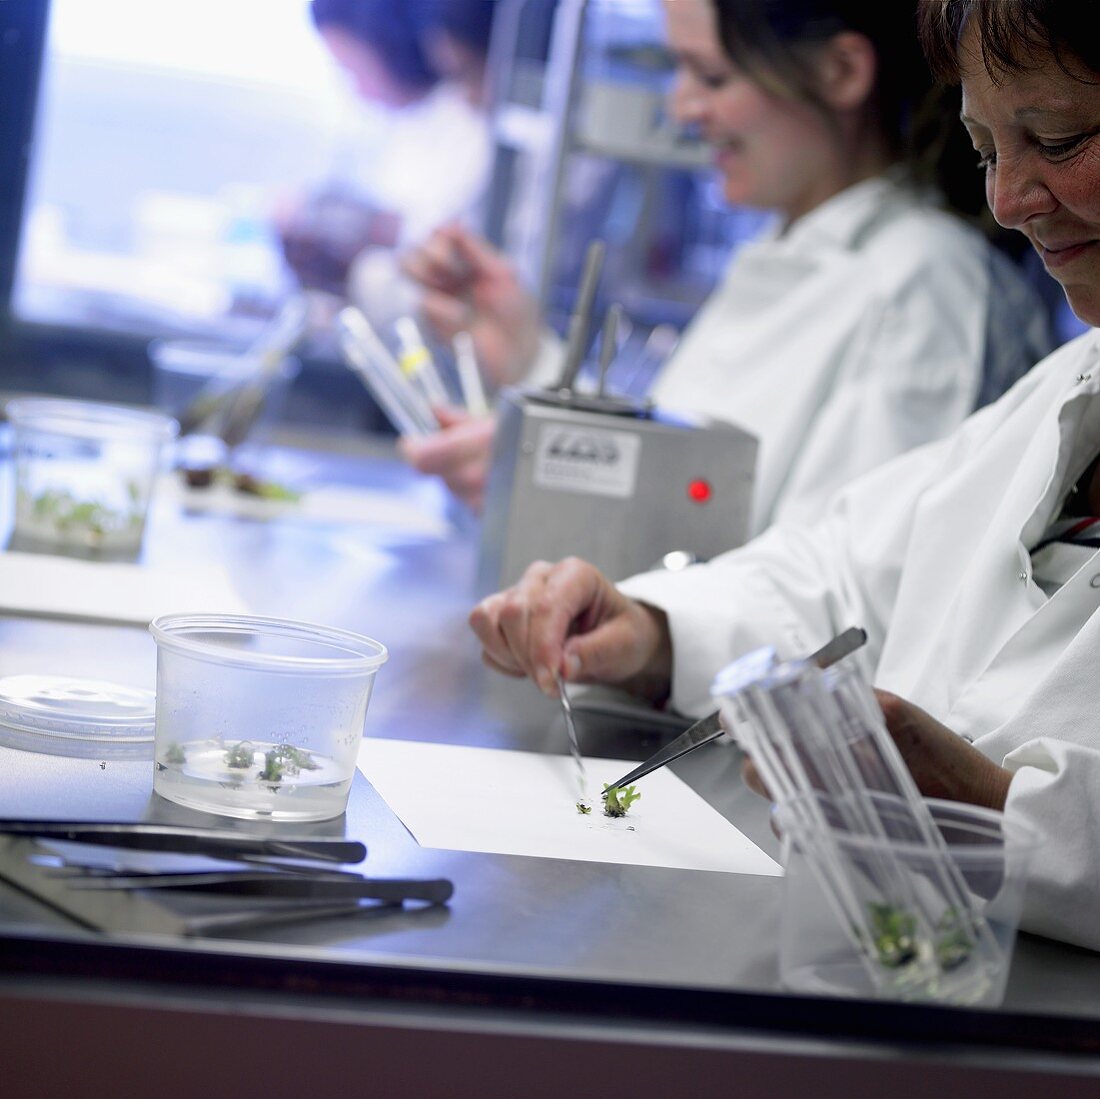 Plants being investigated in a laboratory